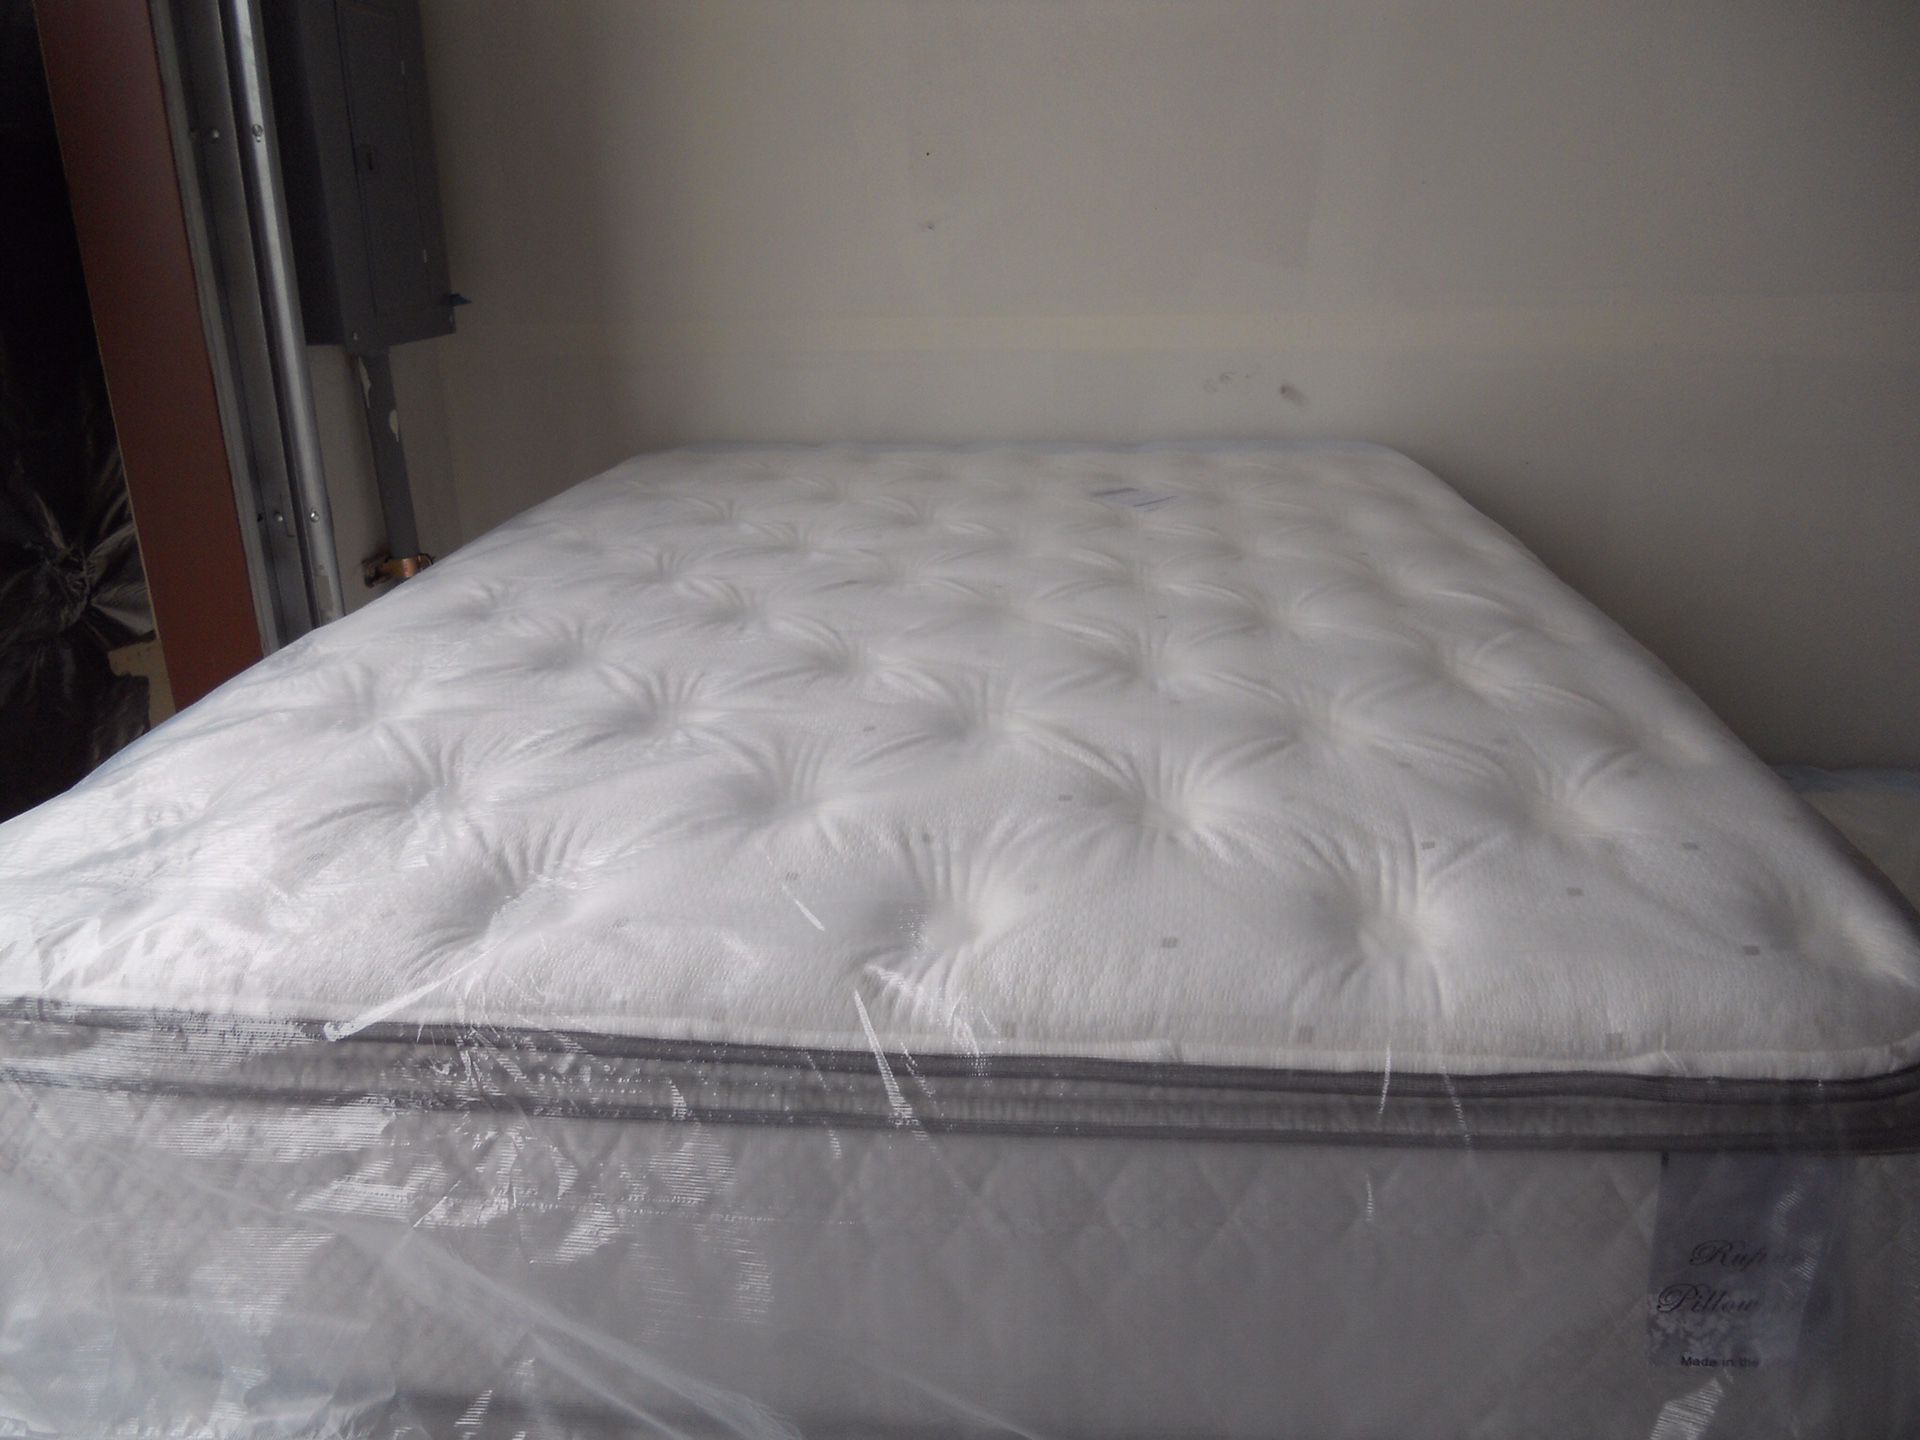 Luxury mattresses- 13 inch thick- pillow top or firm, your choice